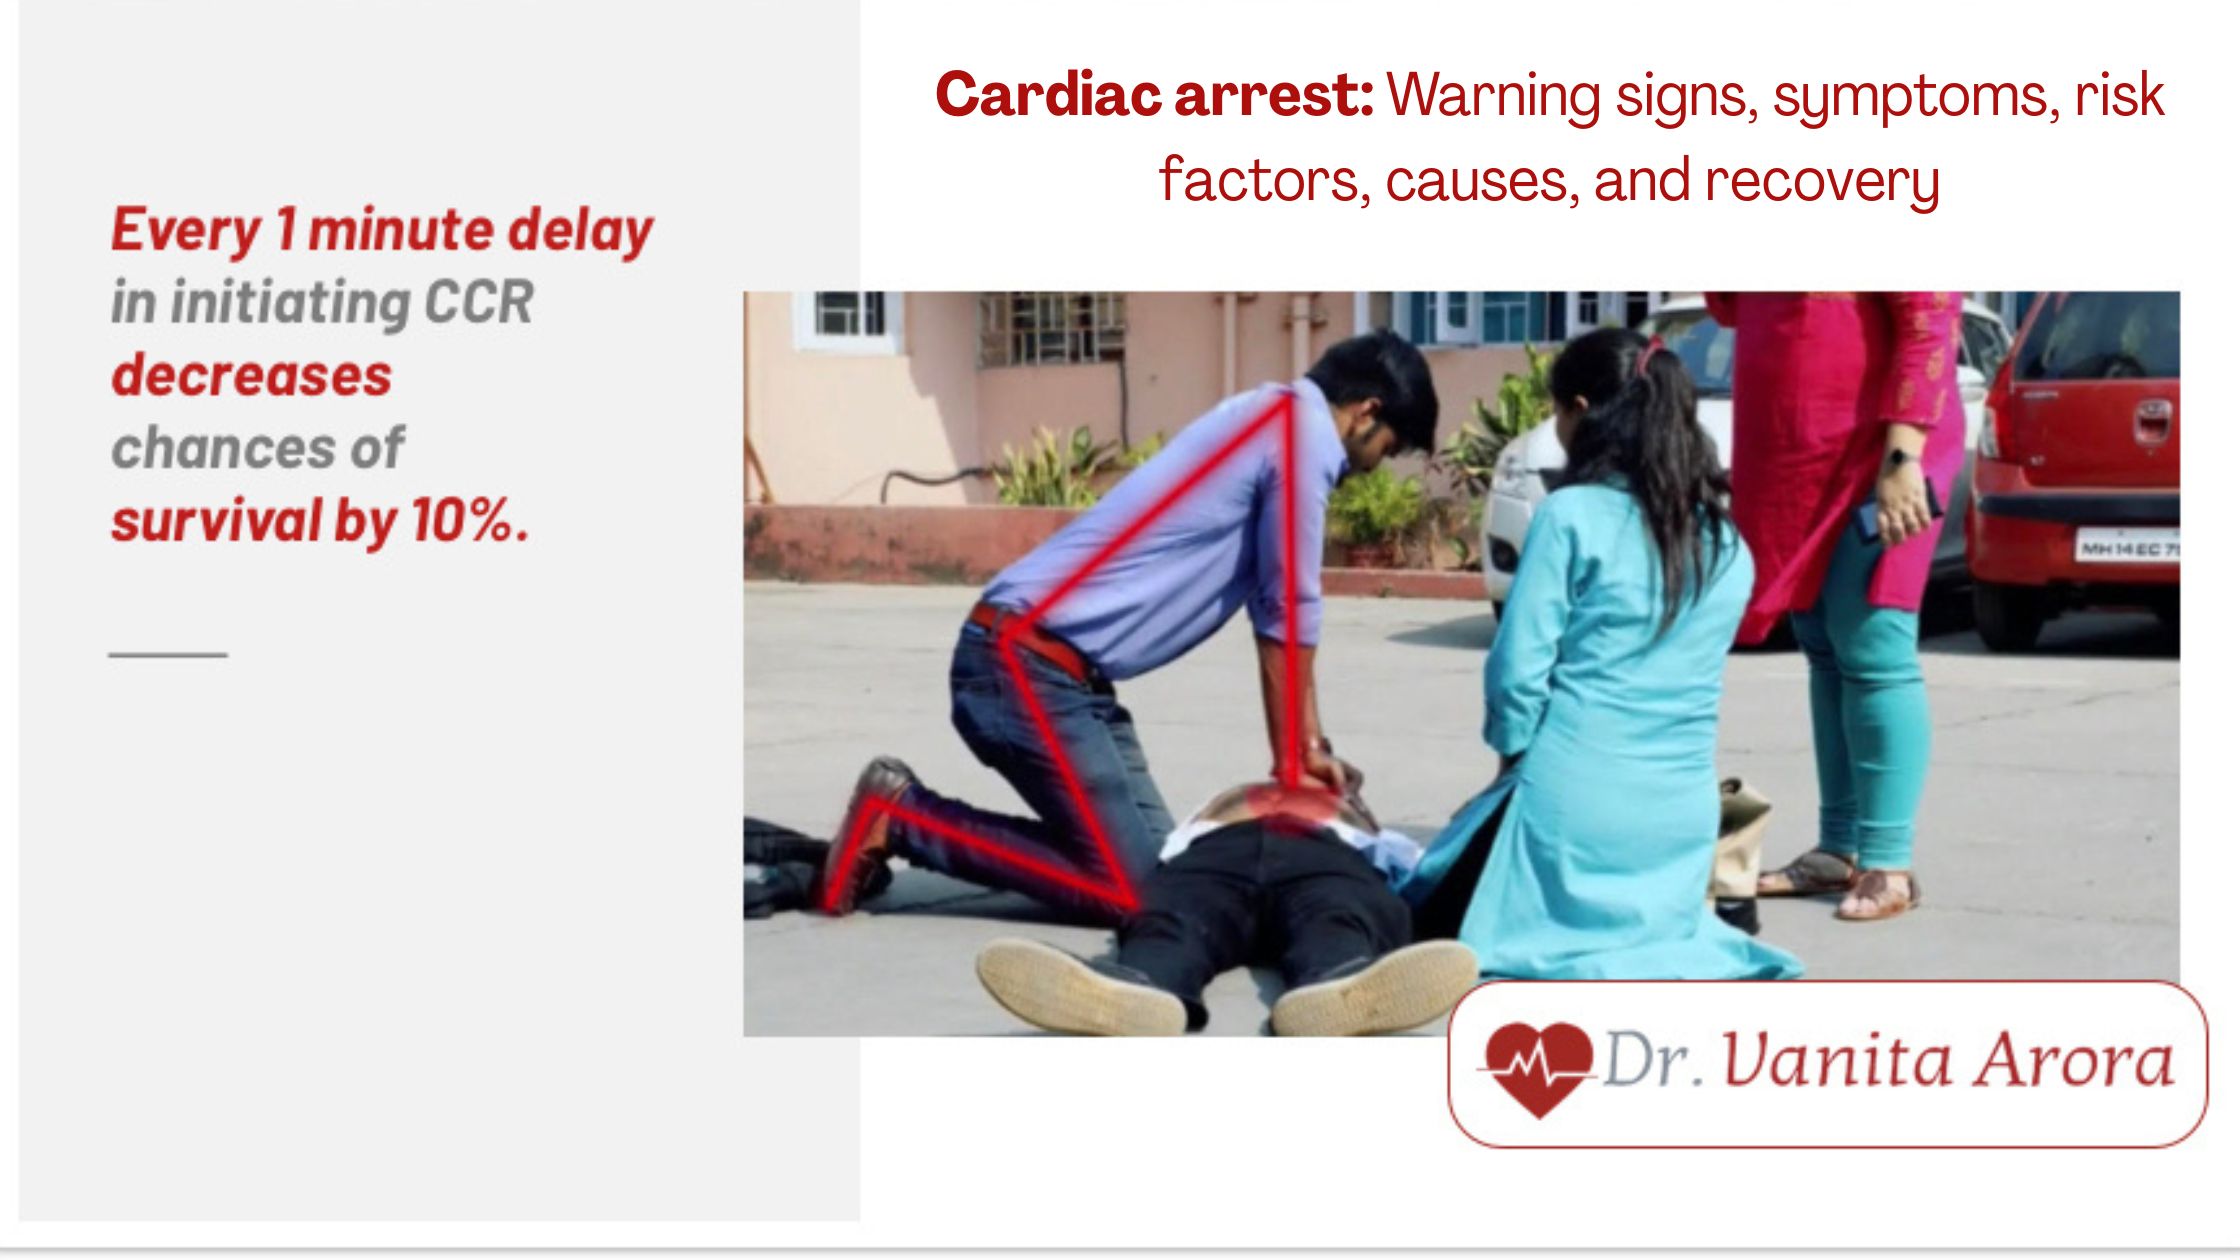 Cardiac arrest: Warning signs, symptoms, risk factors, causes, and recovery